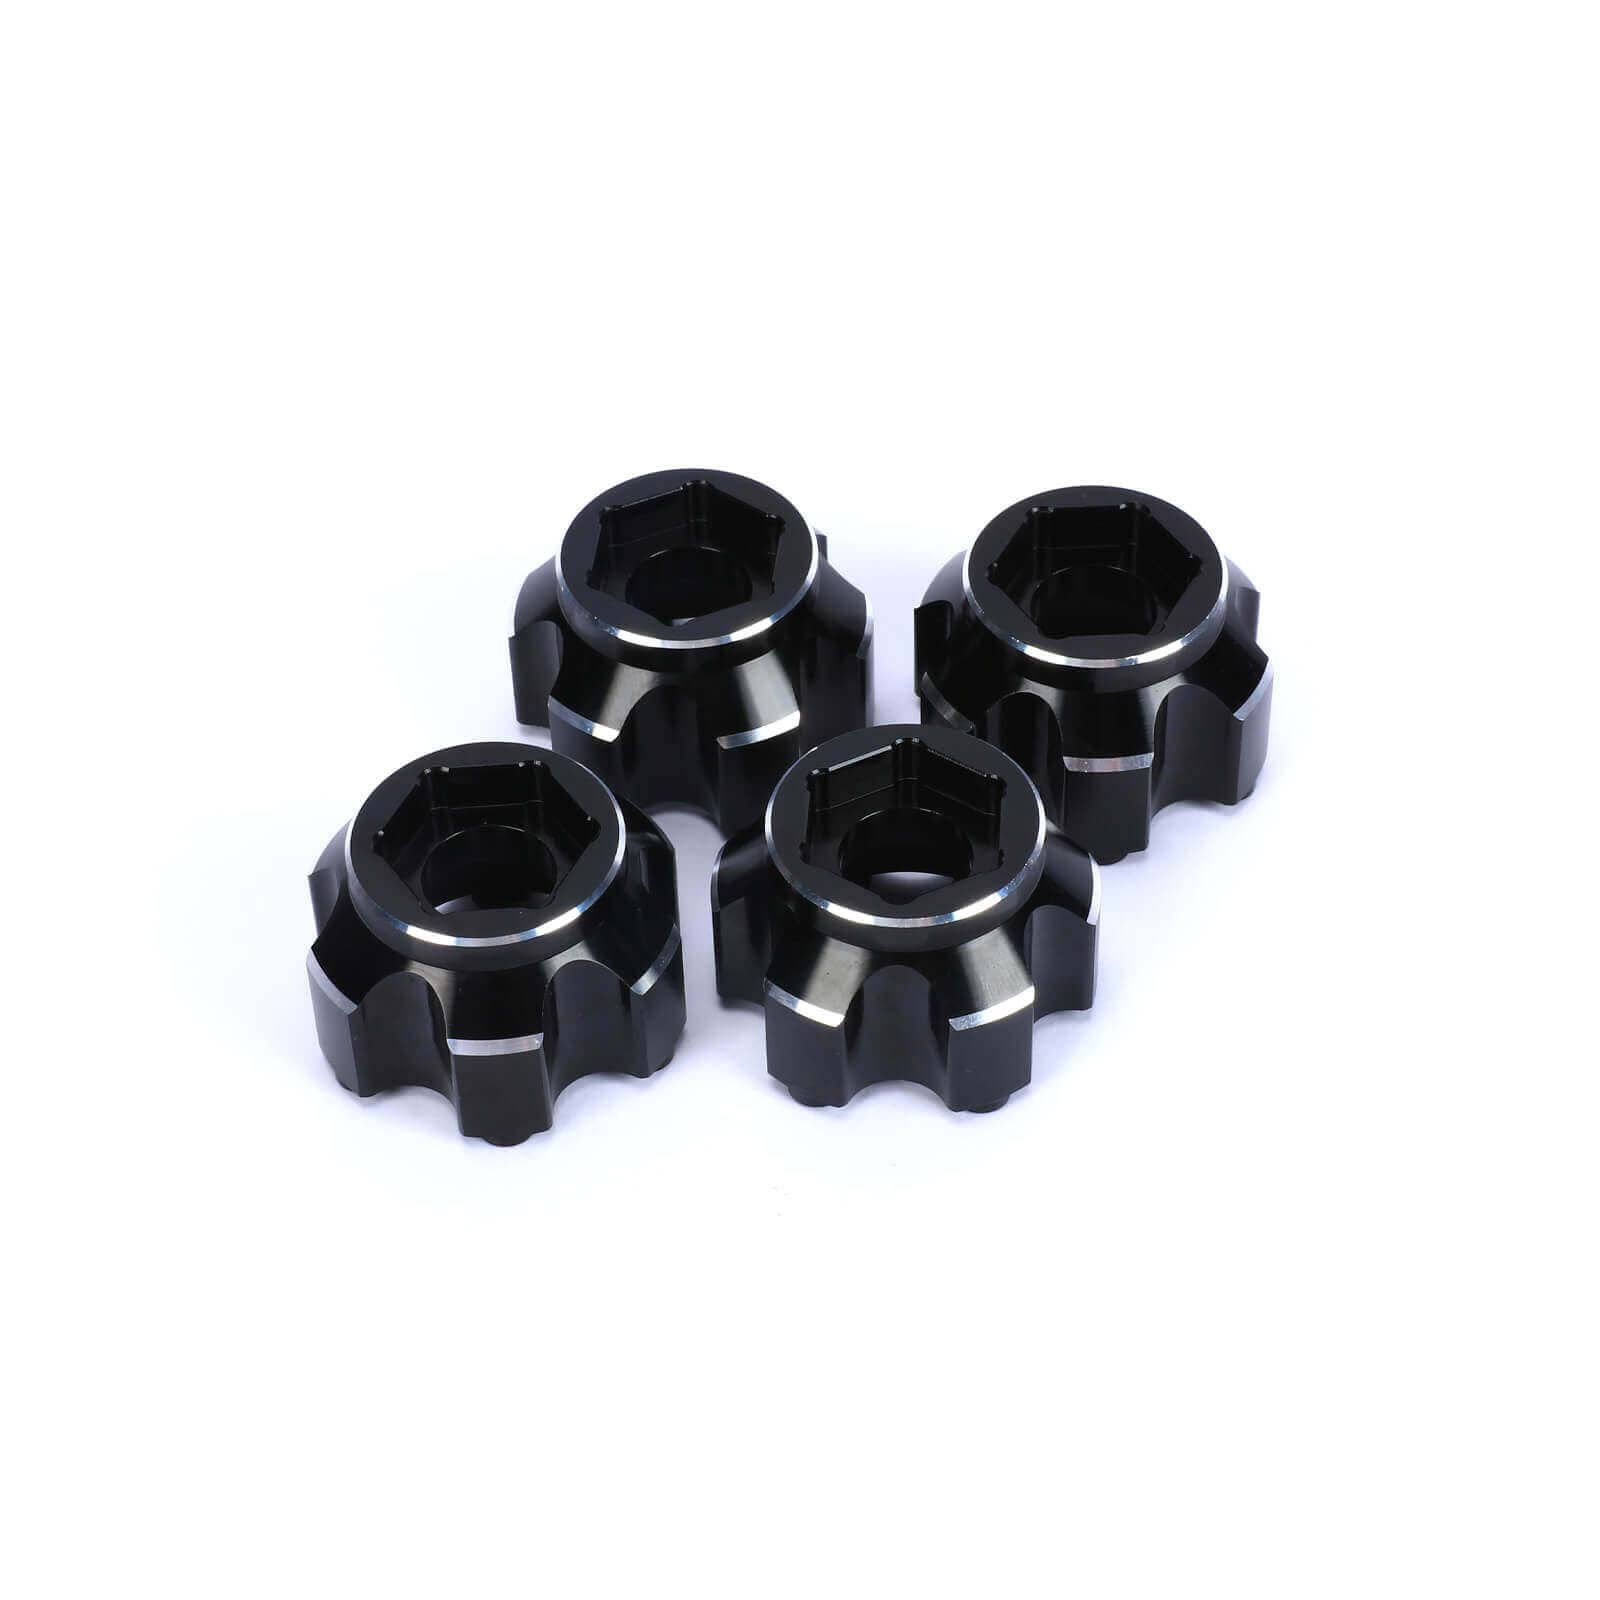 UNIHEX Hex Adapter 1/10 6x30 to 17mm Aluminum Hex Adapters for Pro - line 6x30 Removable Hex Wheels Black - RCAWD